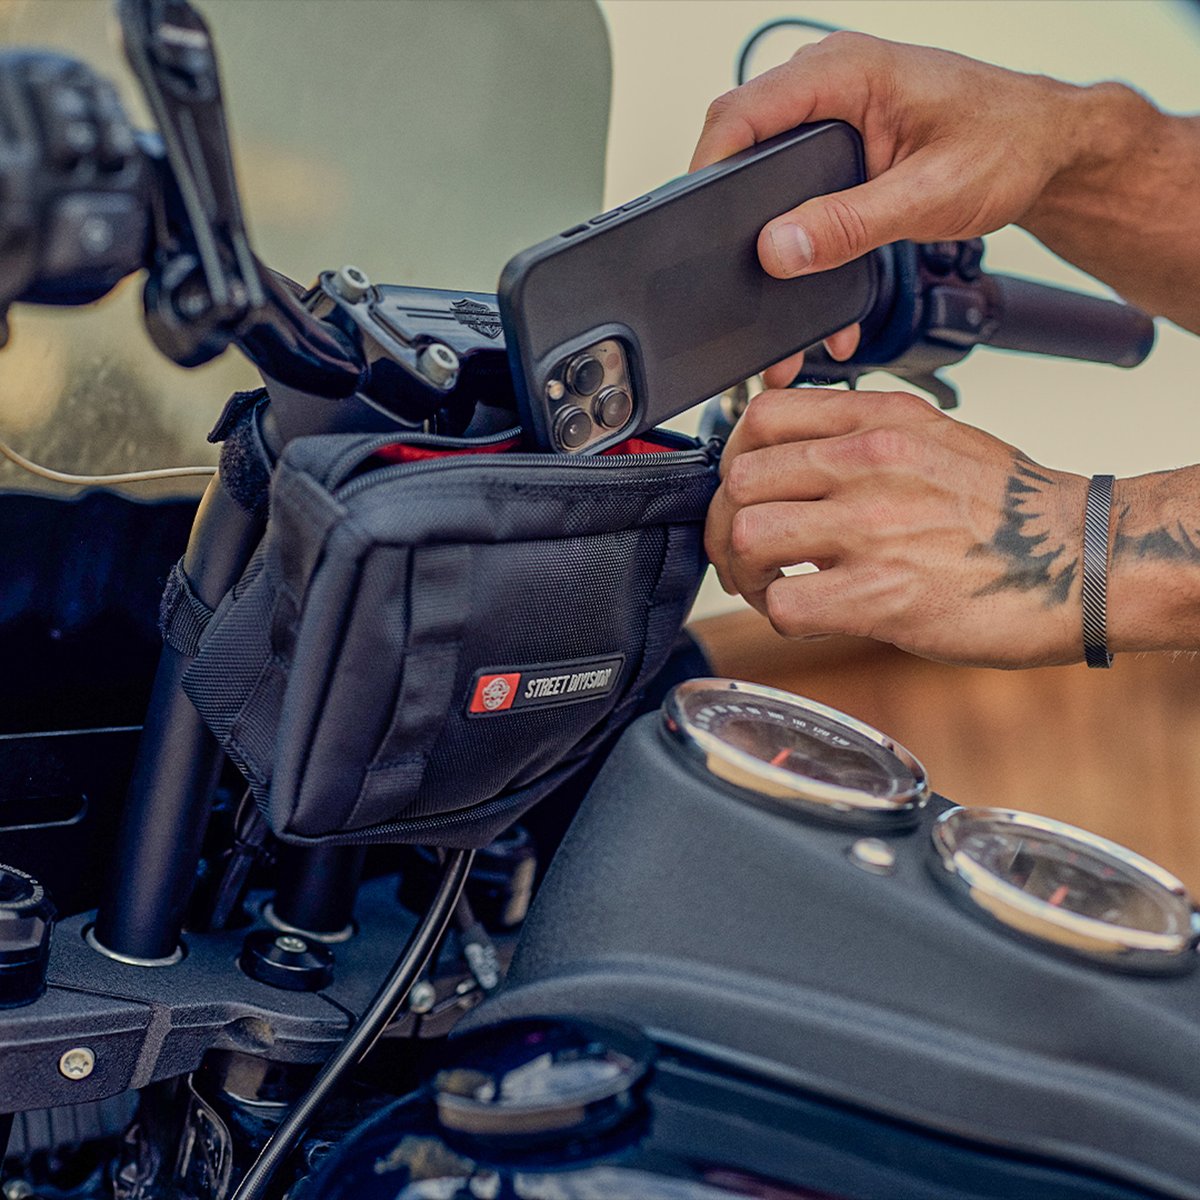 Whether facing the front or the back, you always want to keep your phone within reach even when riding.
#vikingbags #handlebarbag #handlebar #motorcycle #bikerlifestyle #motorcycleluggage